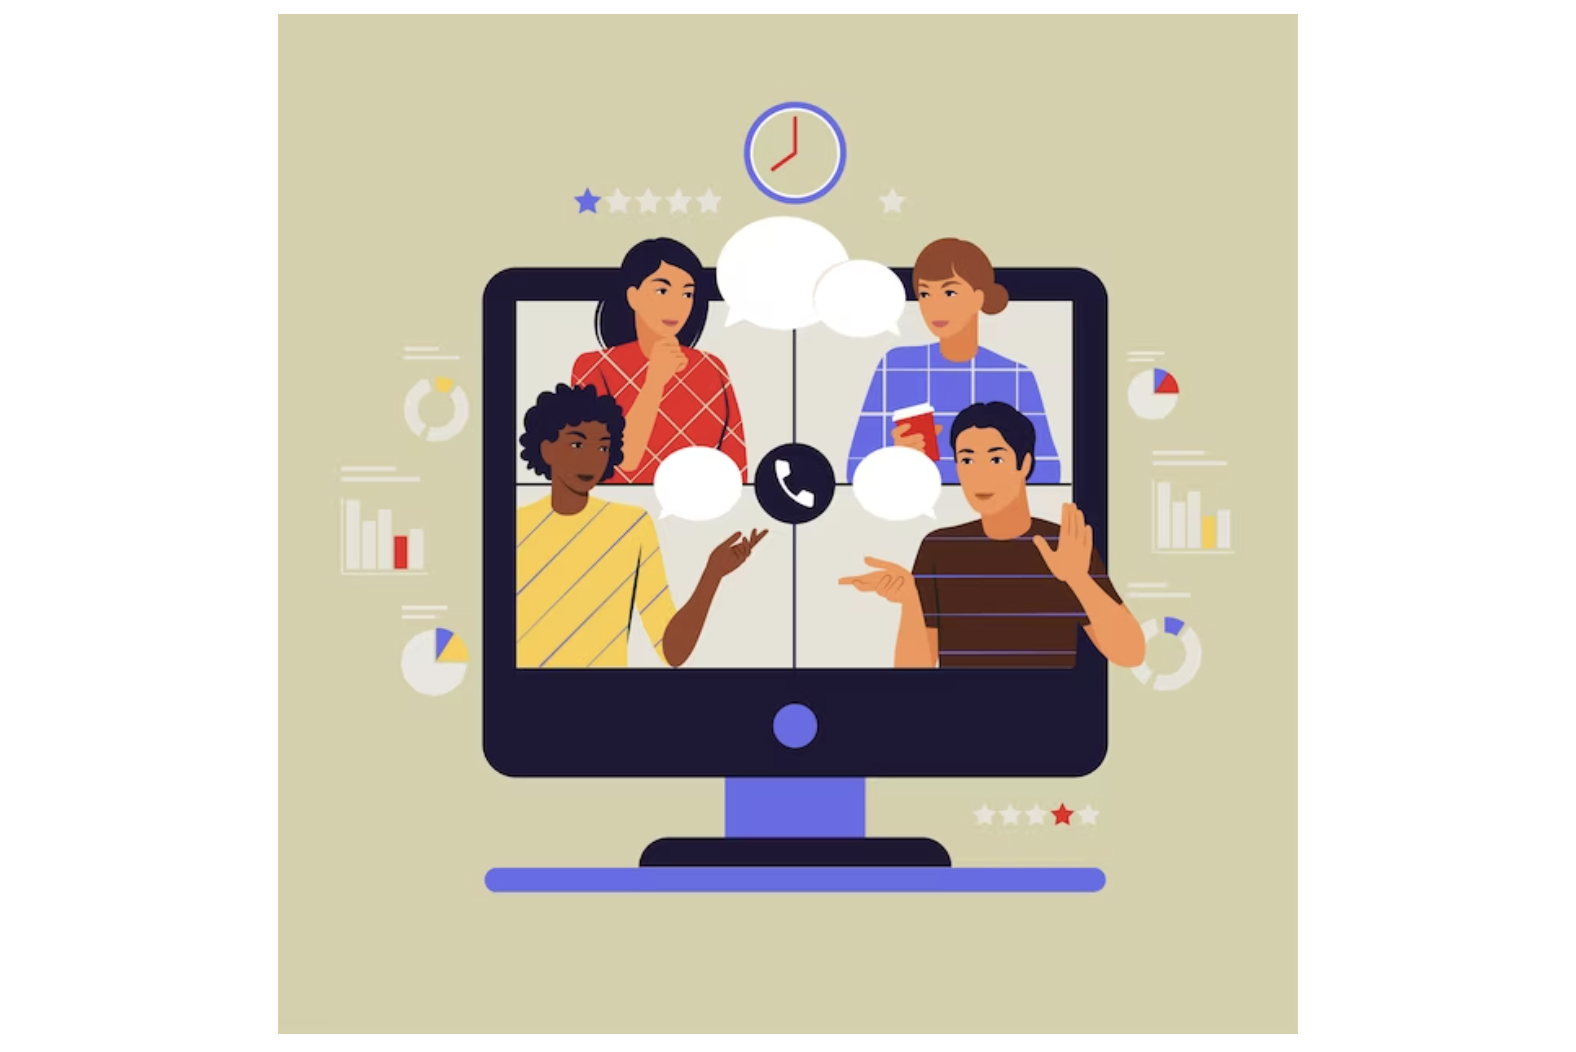 remote team increases productivity